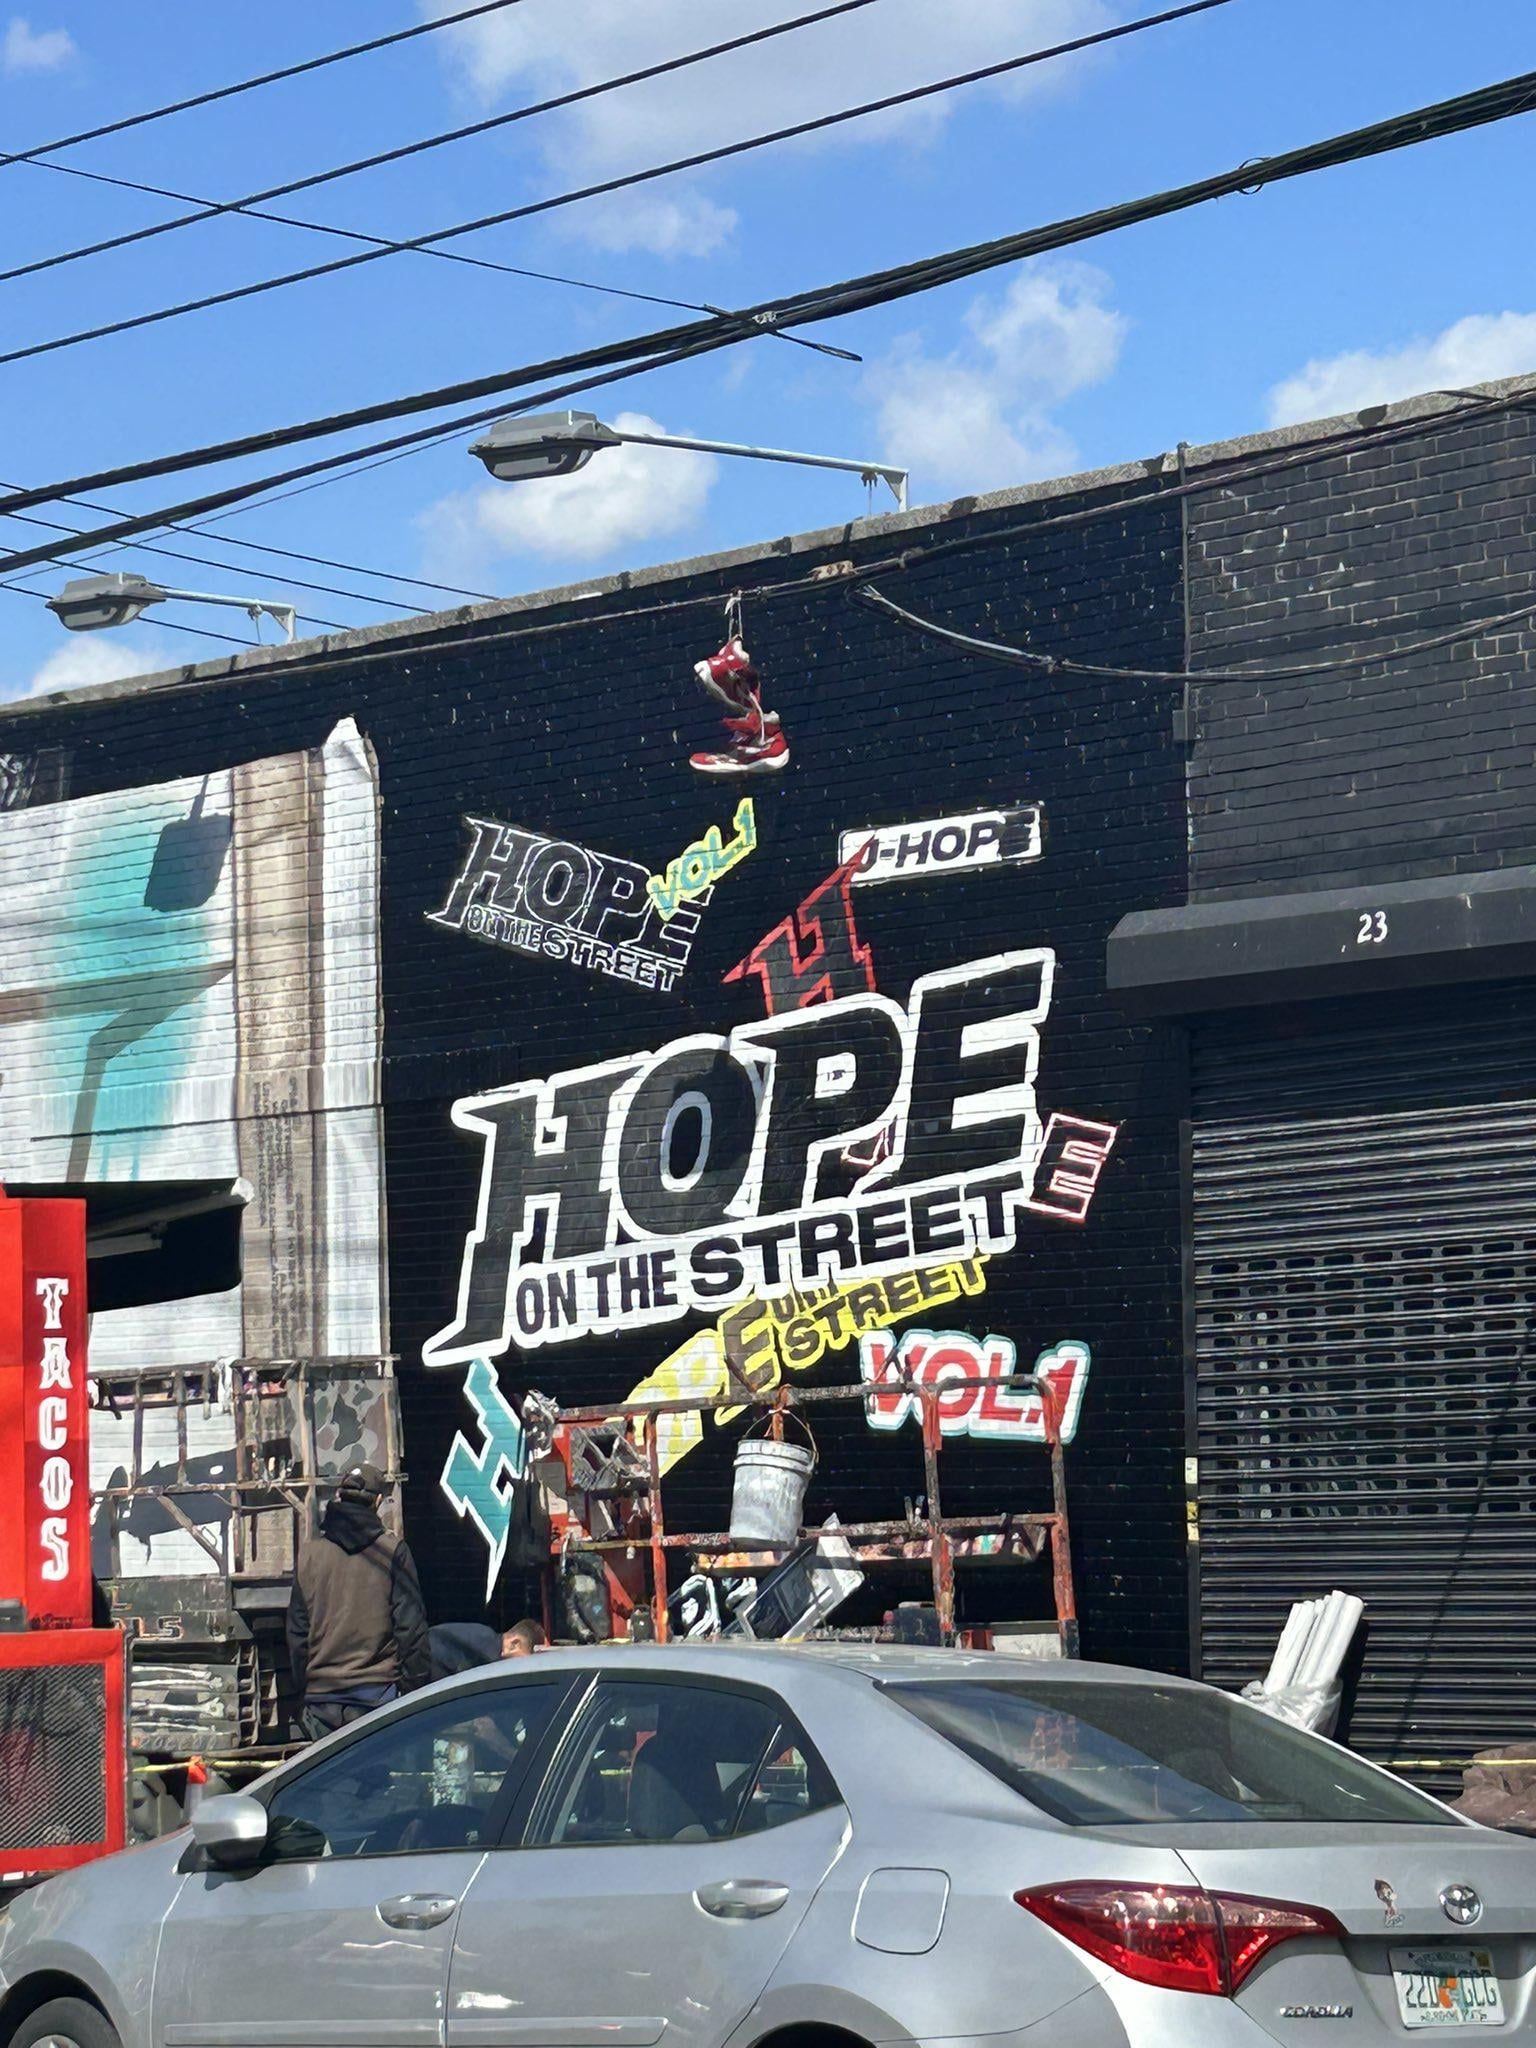 Army spots Hope on the Street promo in Brooklyn